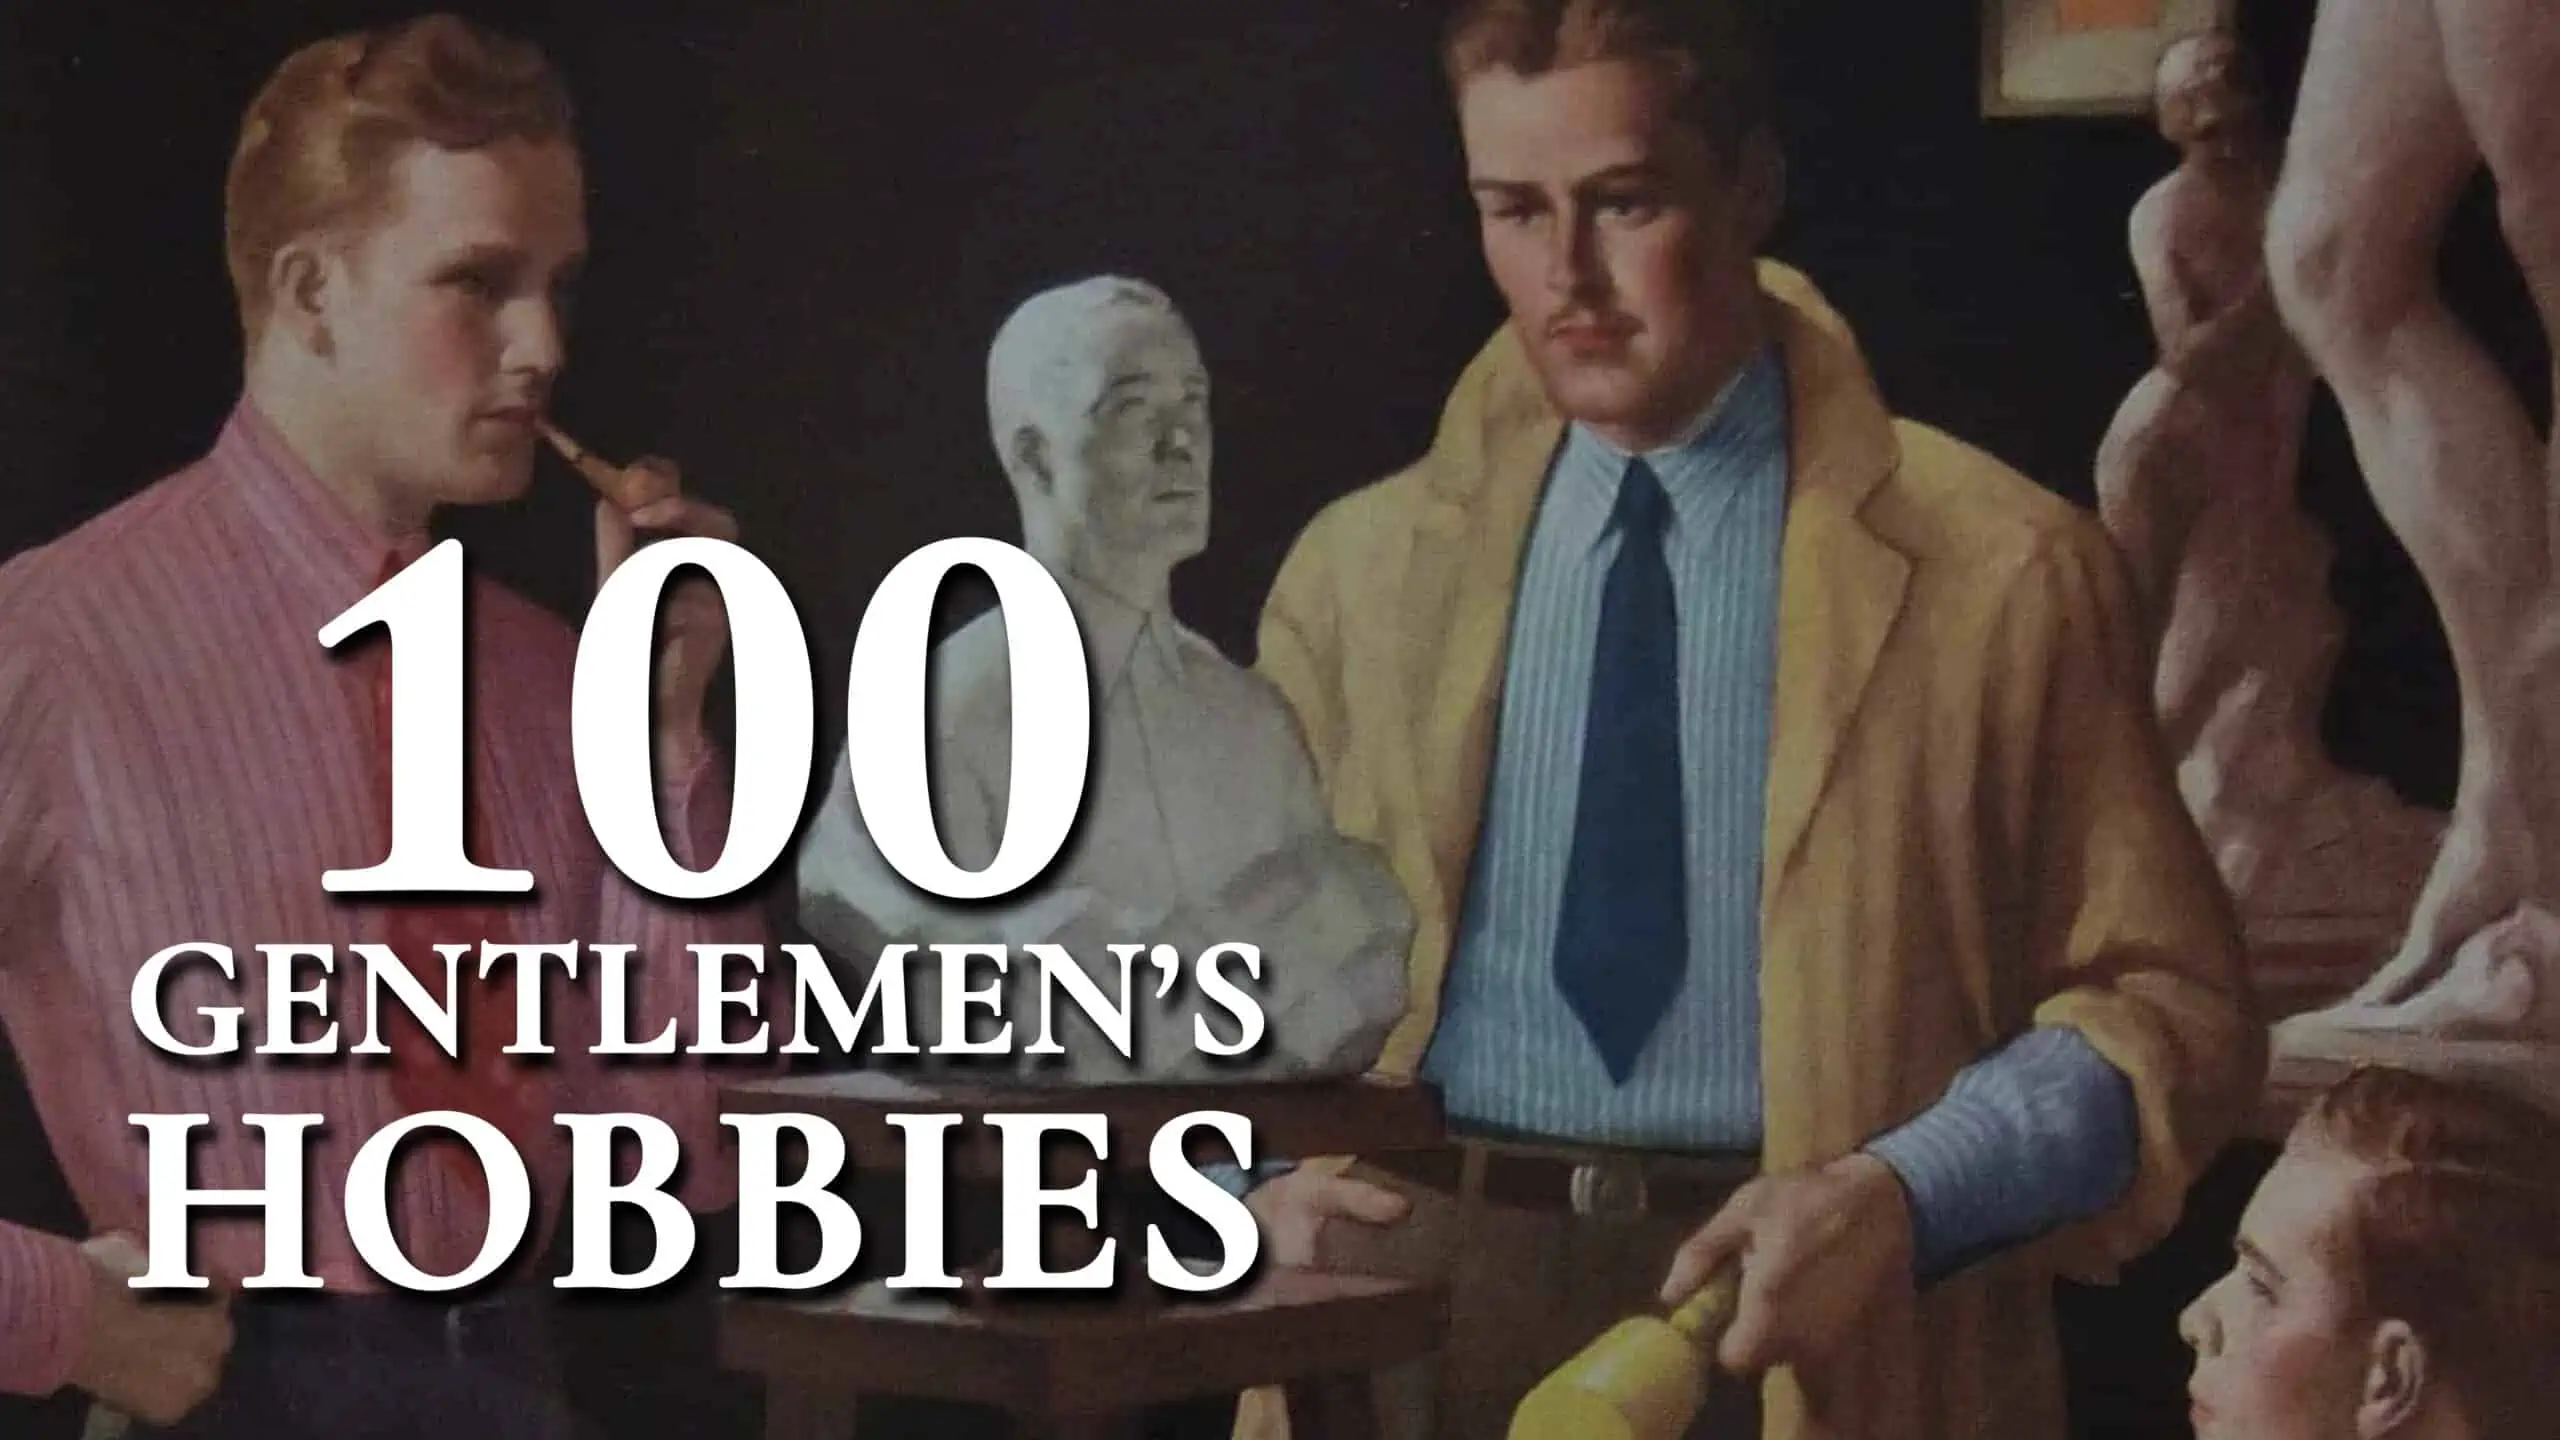 100 Hobbies For Men: A Gentleman's Guide To Leisure Time